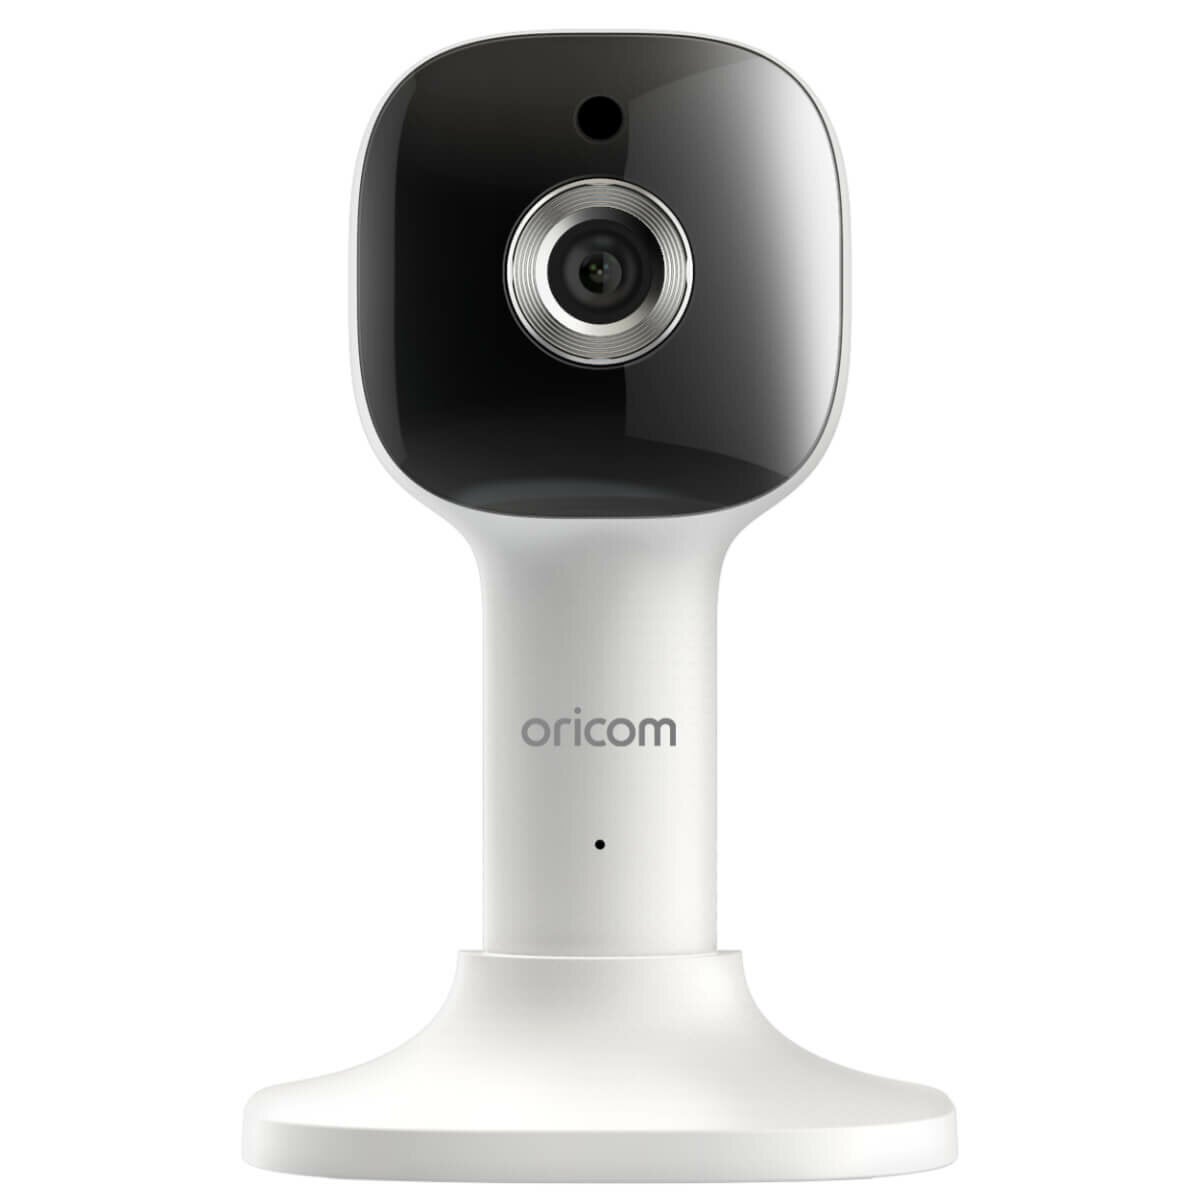 Image of Oricom Smart HD Camera Baby Monitor with Remote Access OBHFCU